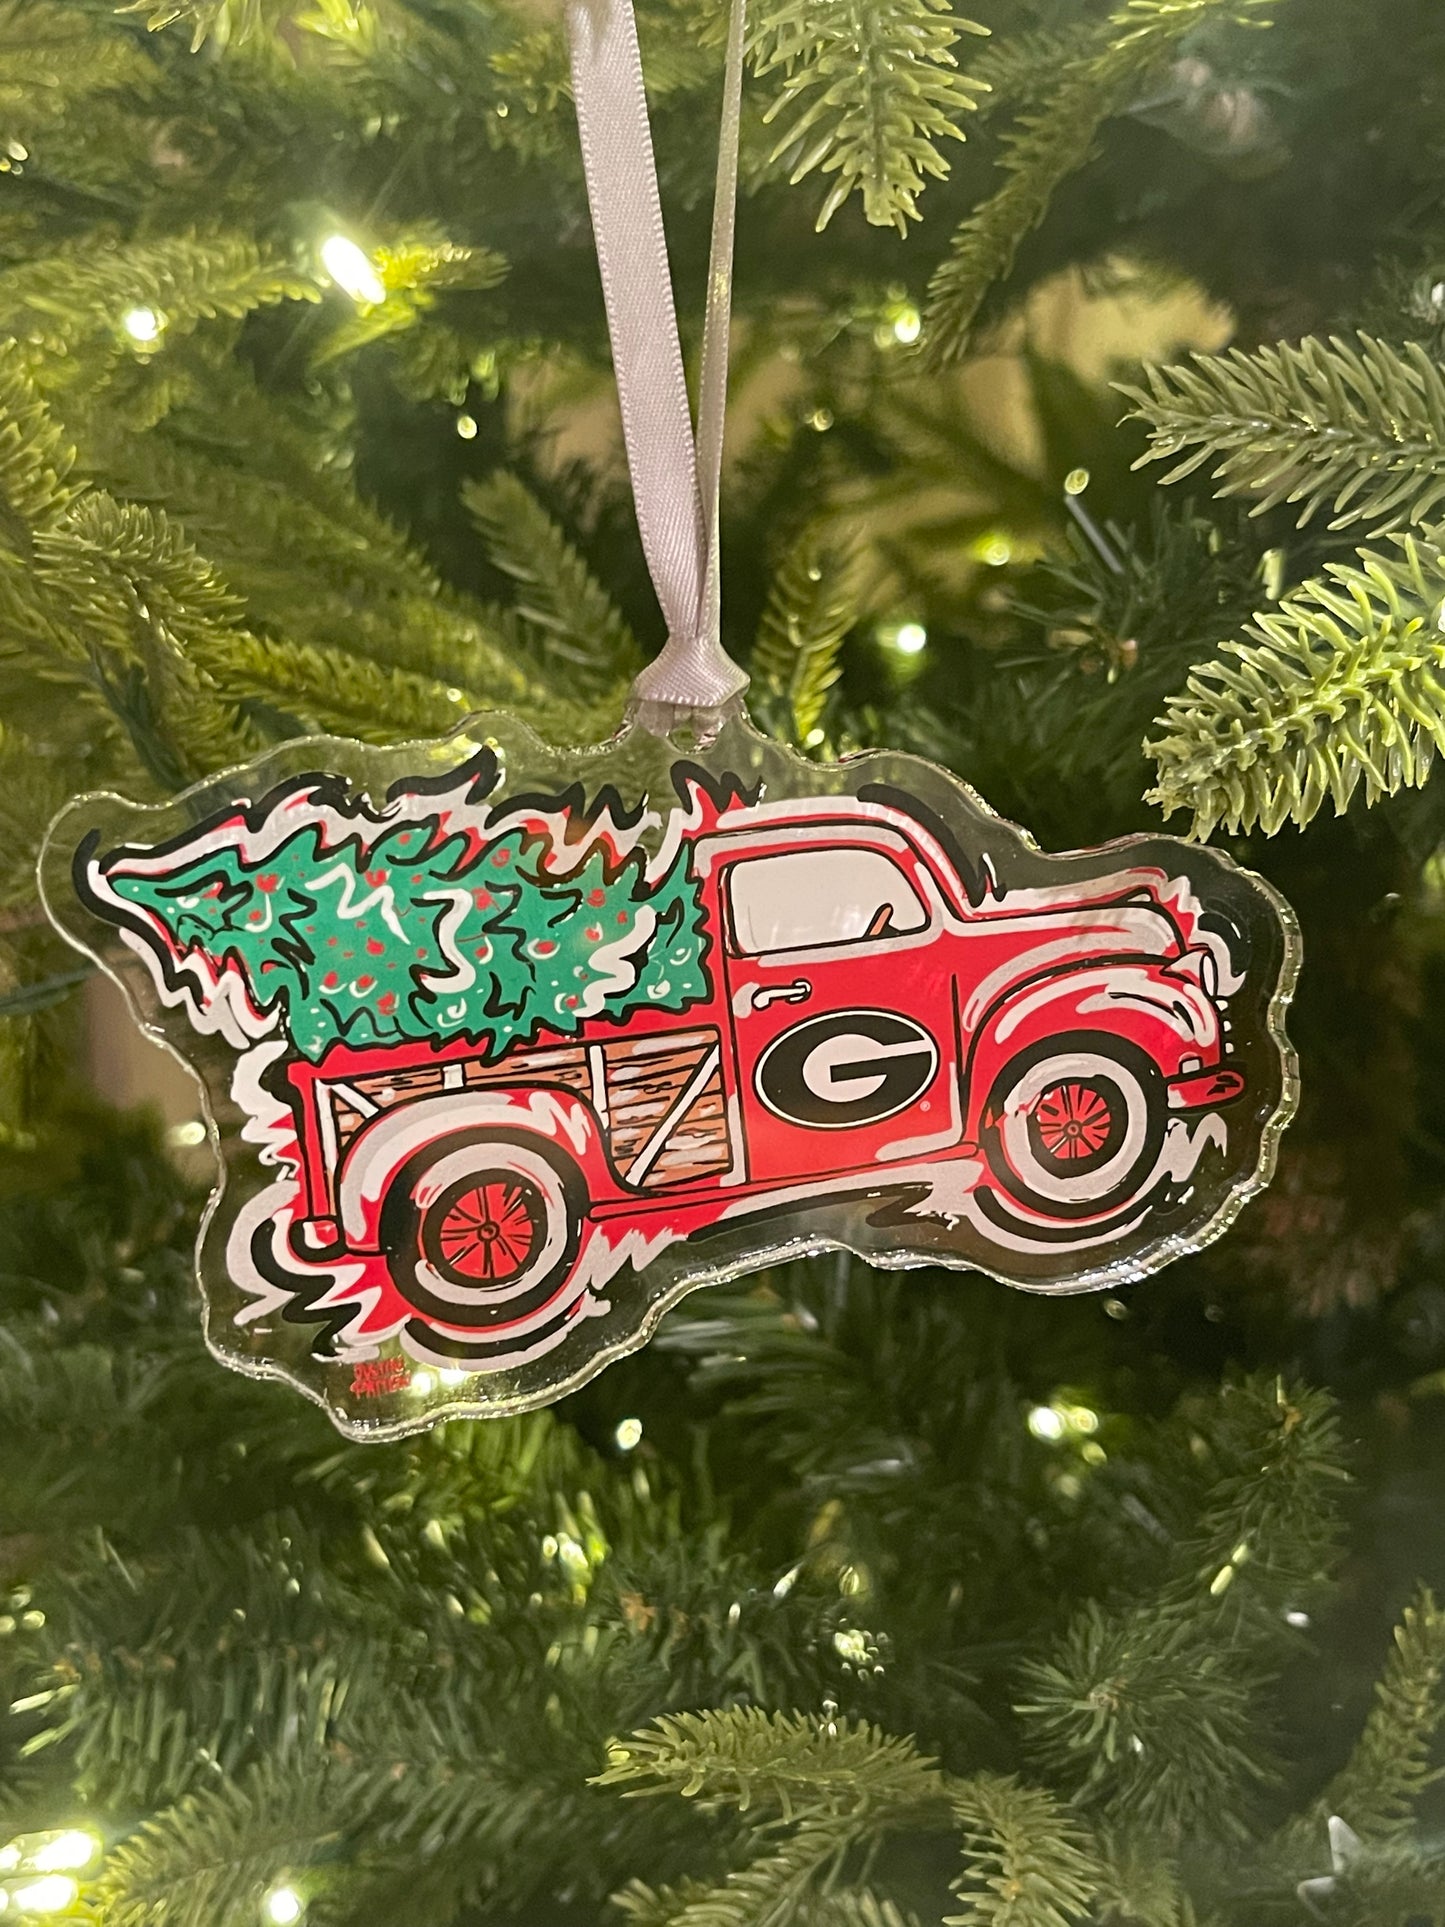 University of Georgia Christmas Truck Ornament by Justin Patten